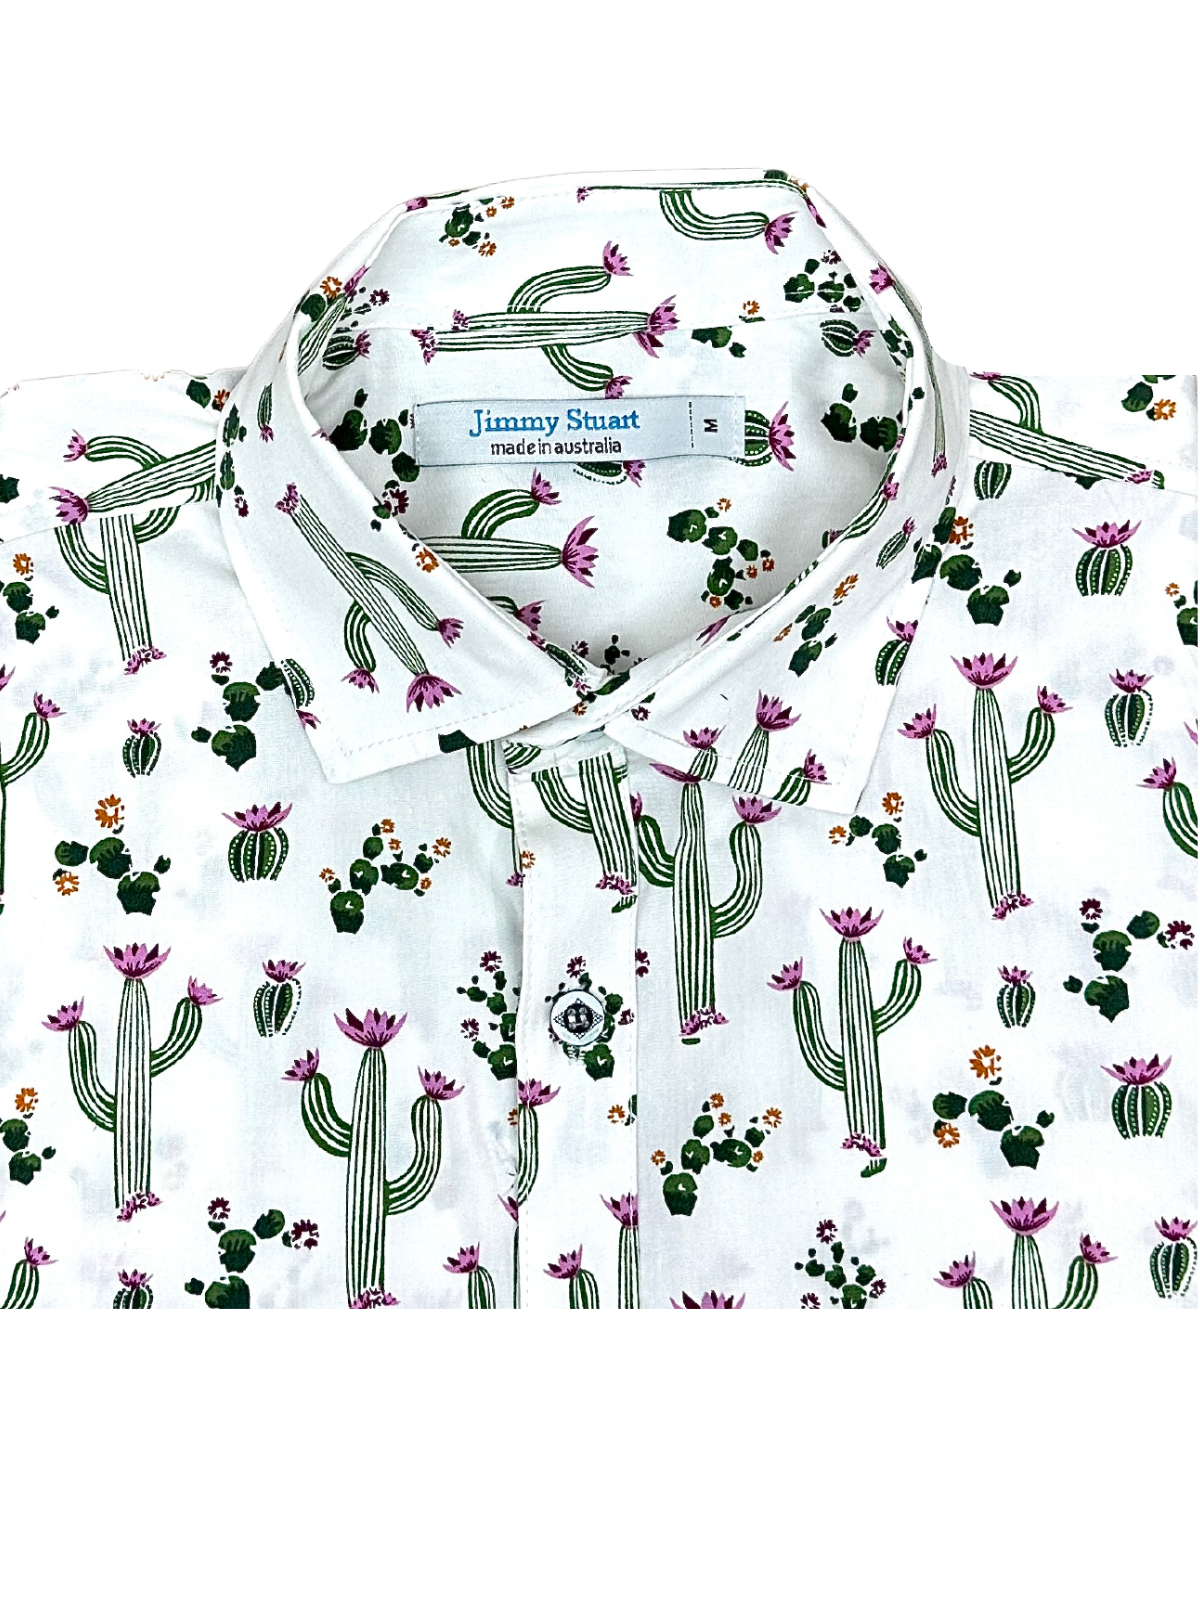 Cactus Abstract Cotton S/S Big Mens Shirt - Green/White